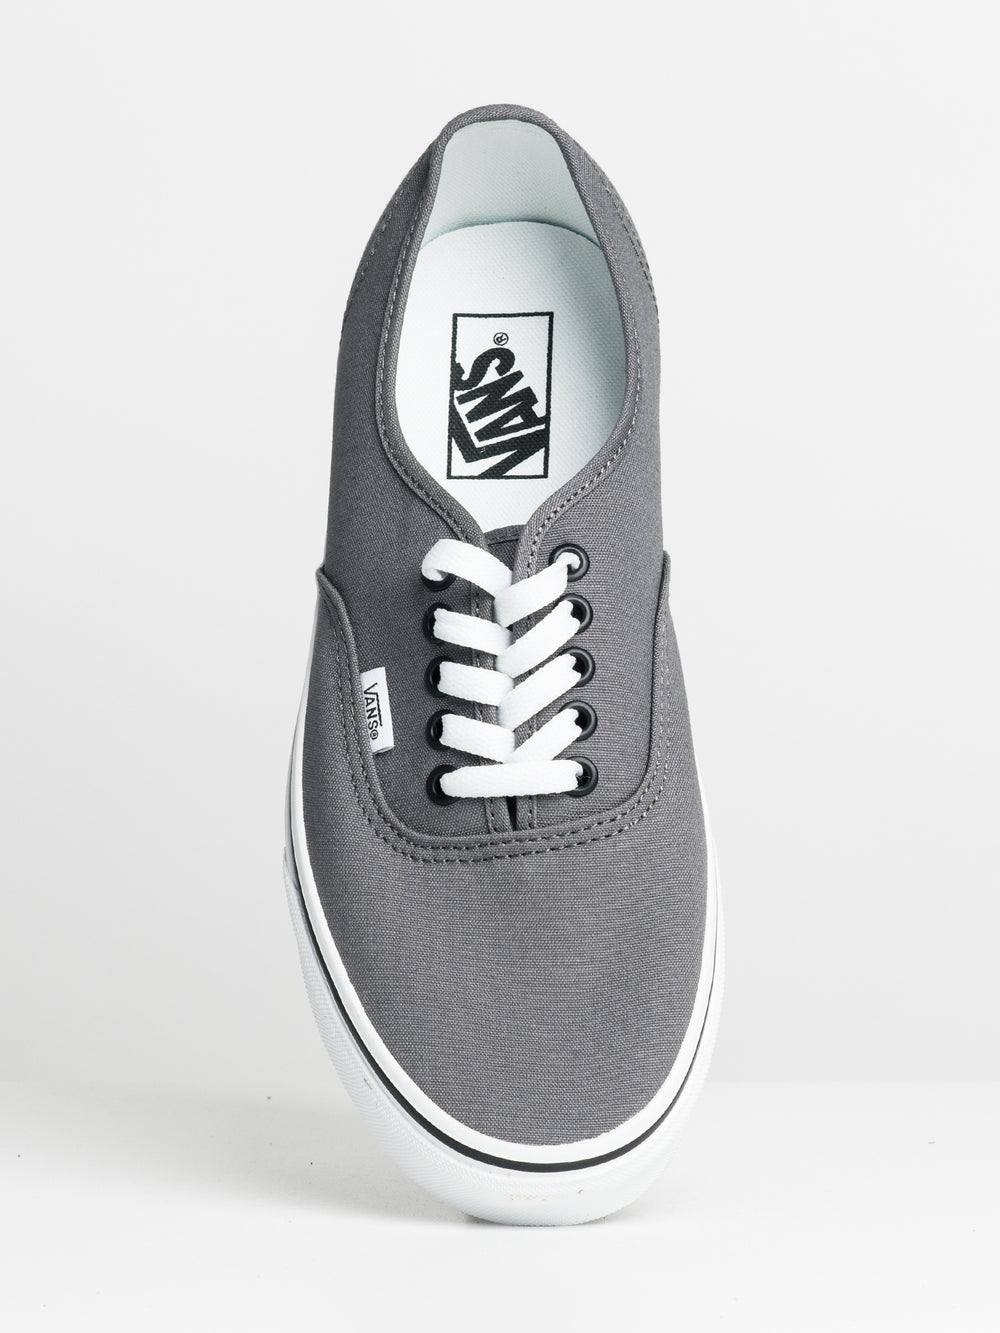 MENS VANS AUTHENTIC PEWTER/WHITE SNEAKER - CLEARANCE